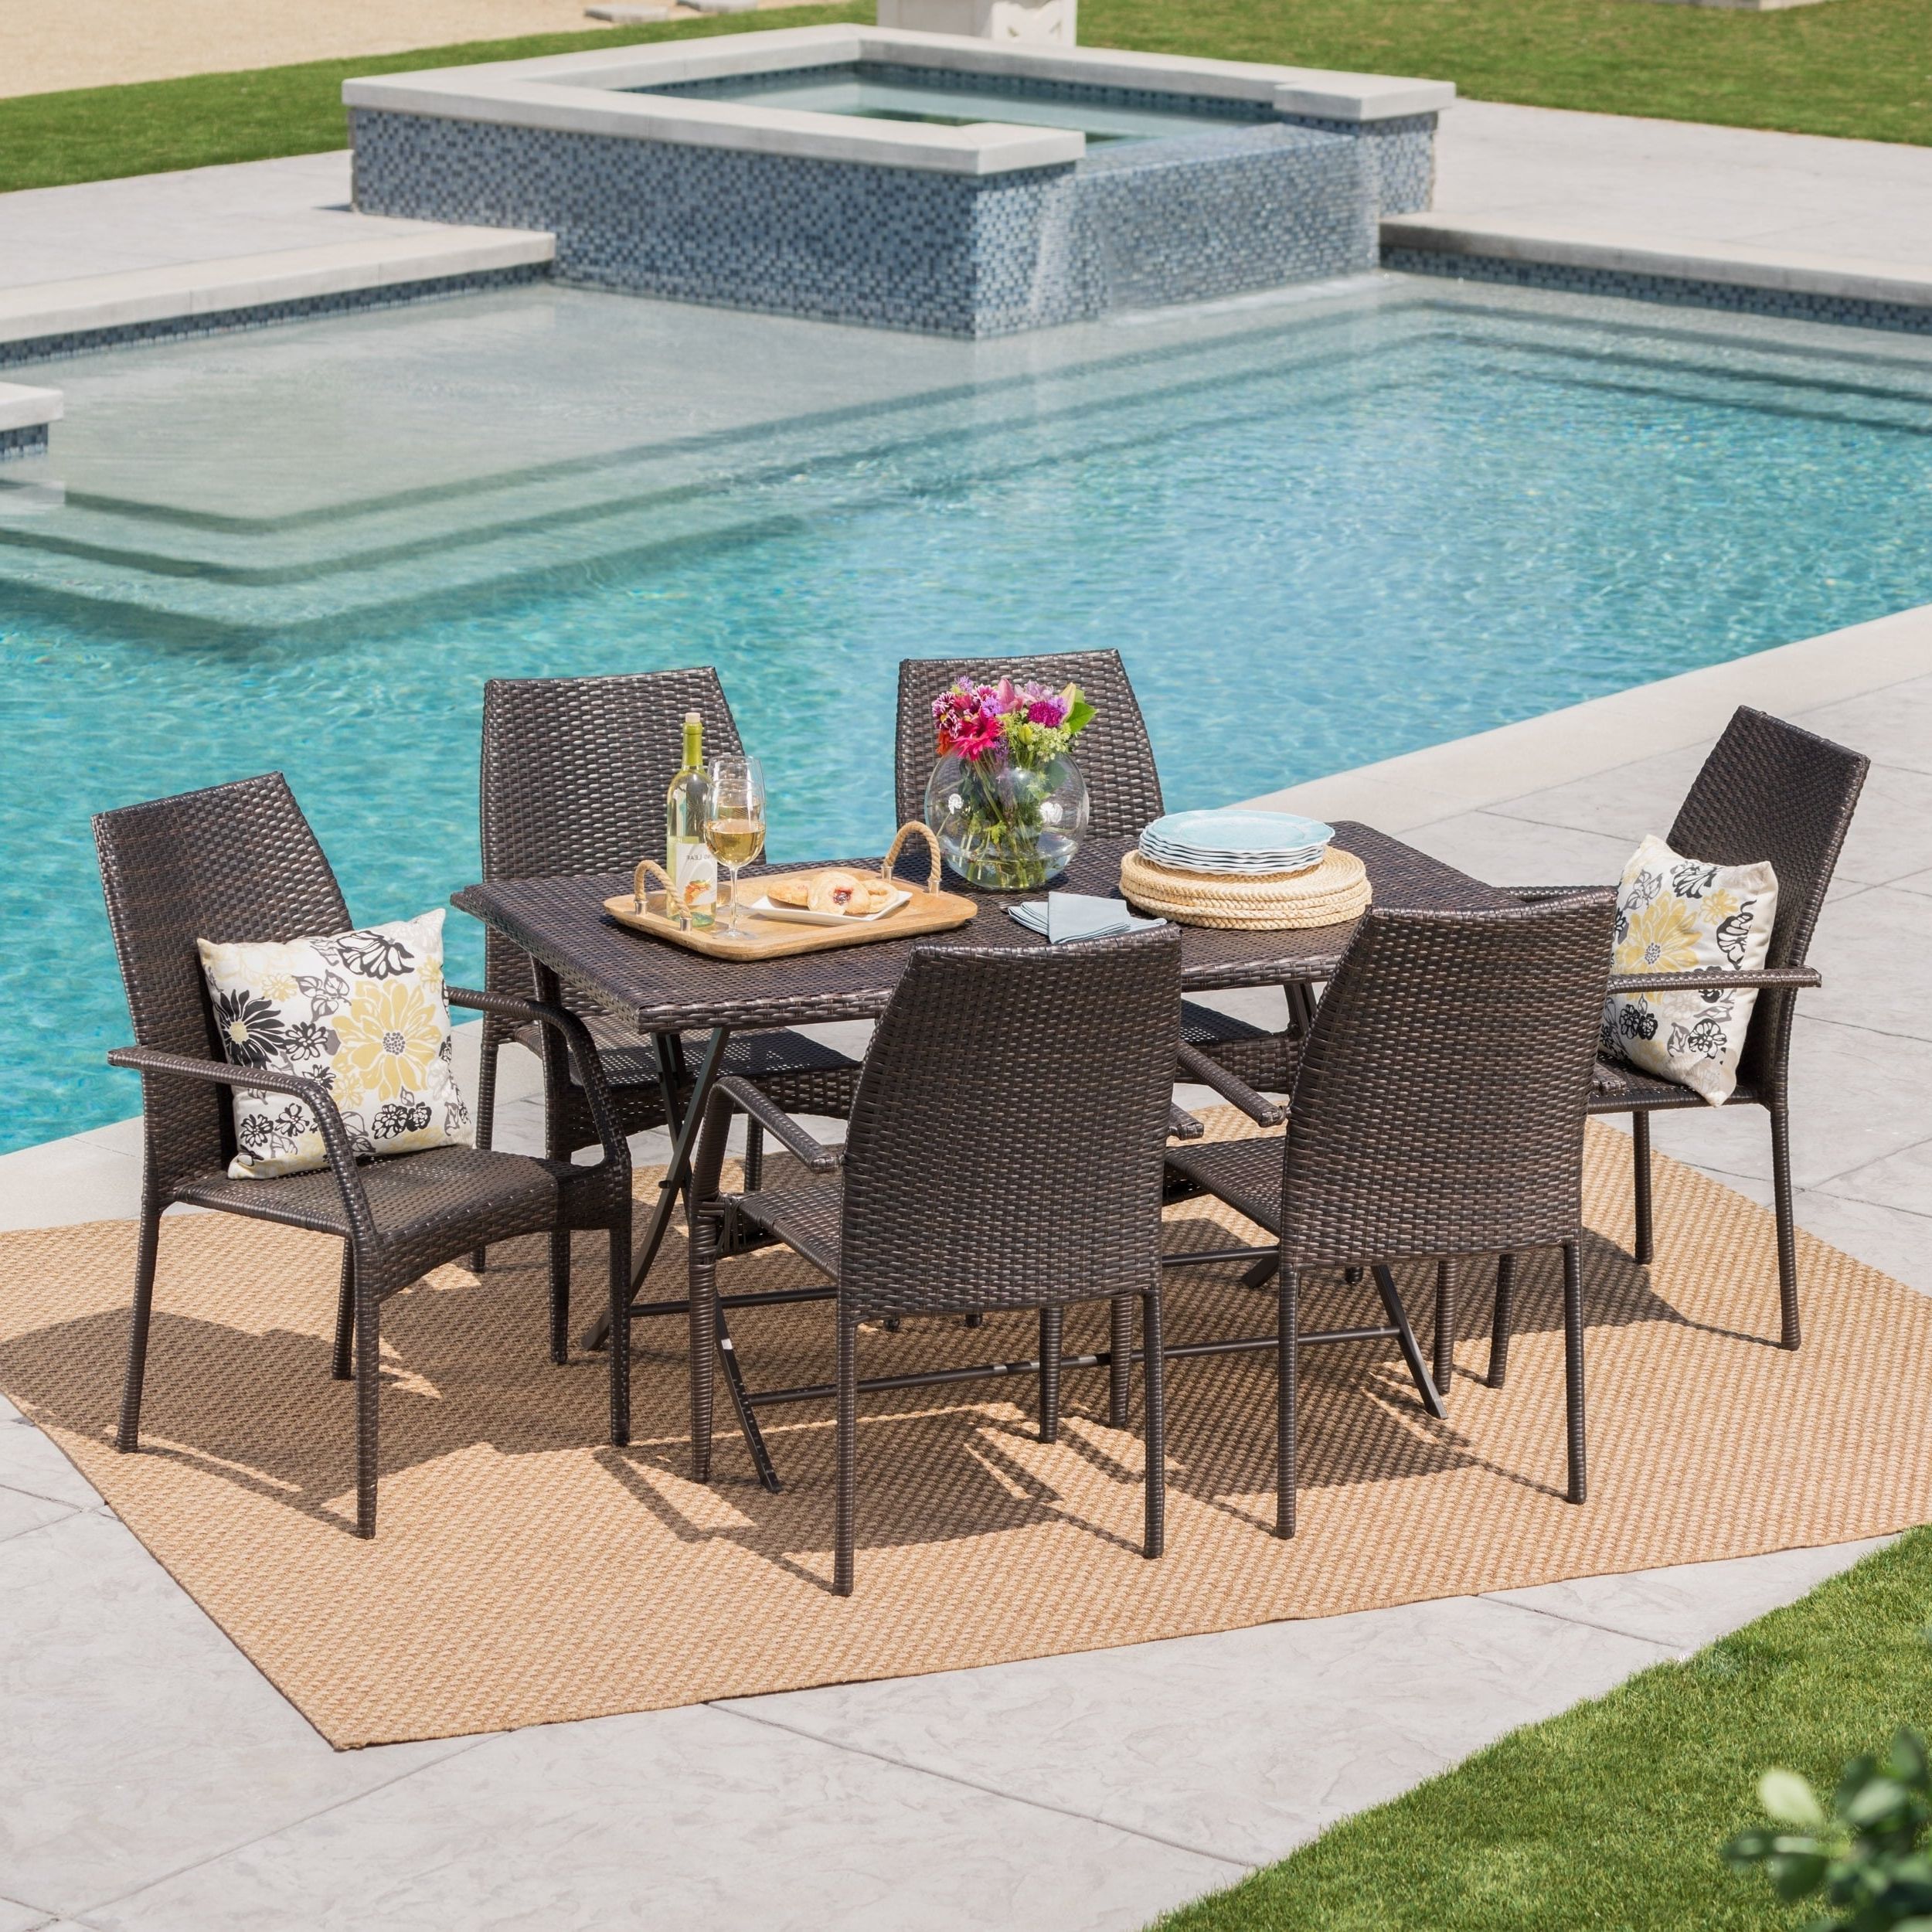 Brown Wicker Rectangular Patio Dining Sets With Regard To 2019 April Outdoor 7 Piece Rectangle Foldable Wicker Dining Set Brown N/a (View 1 of 15)